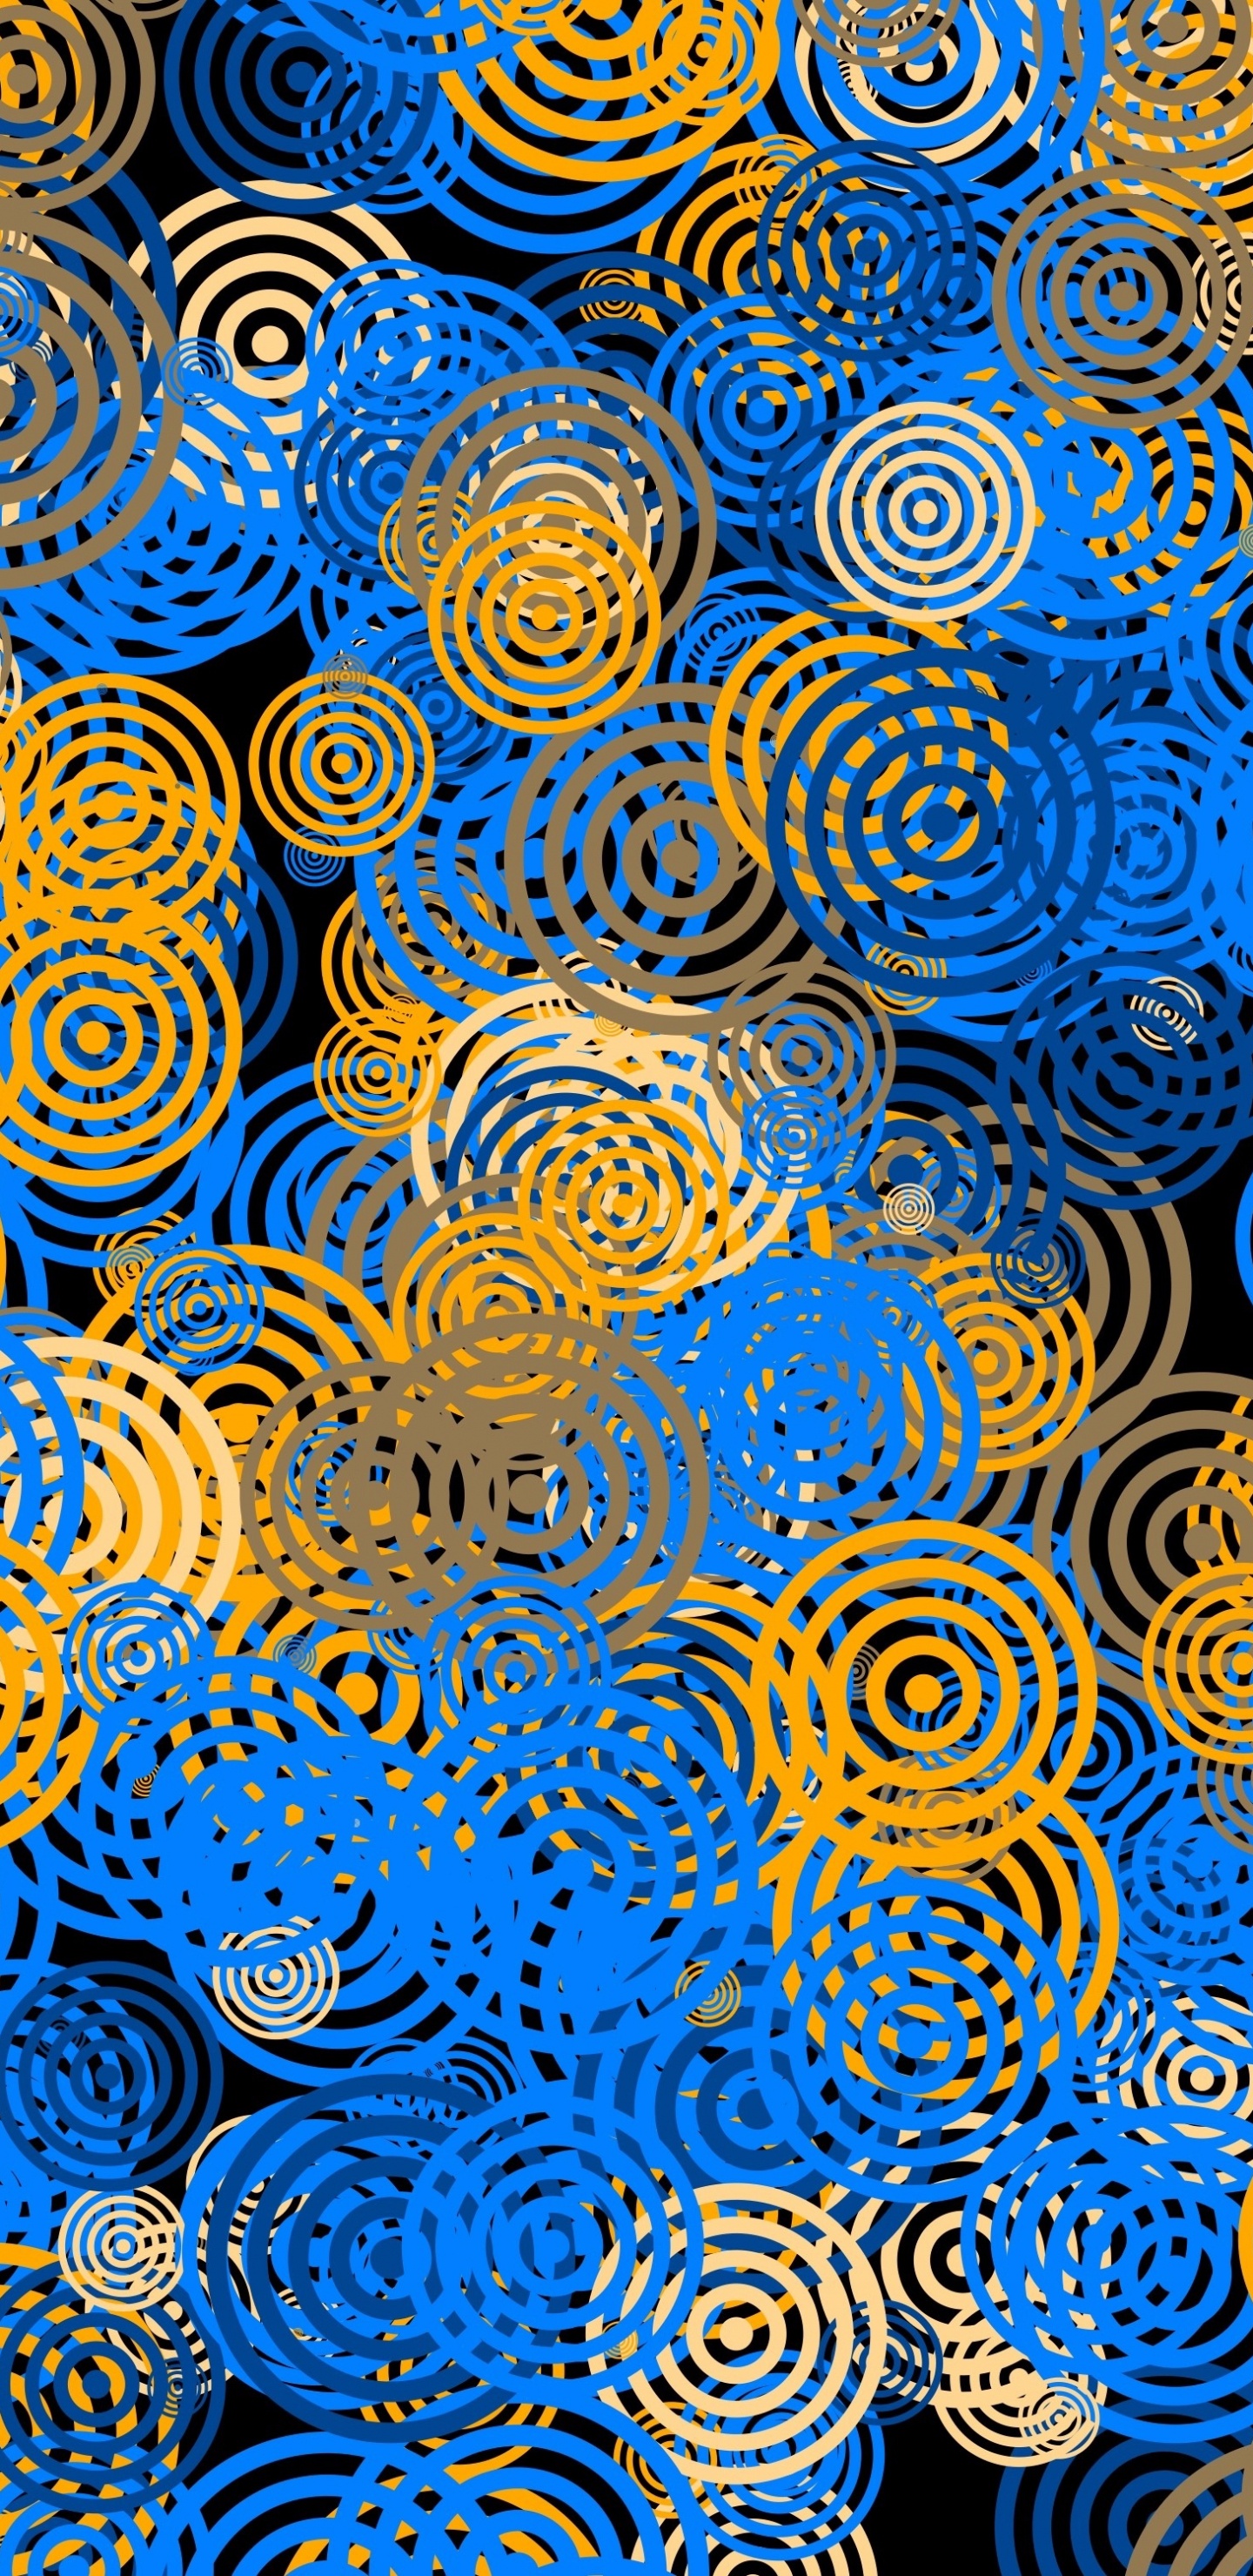 Blue and Yellow Round Decor. Wallpaper in 1440x2960 Resolution